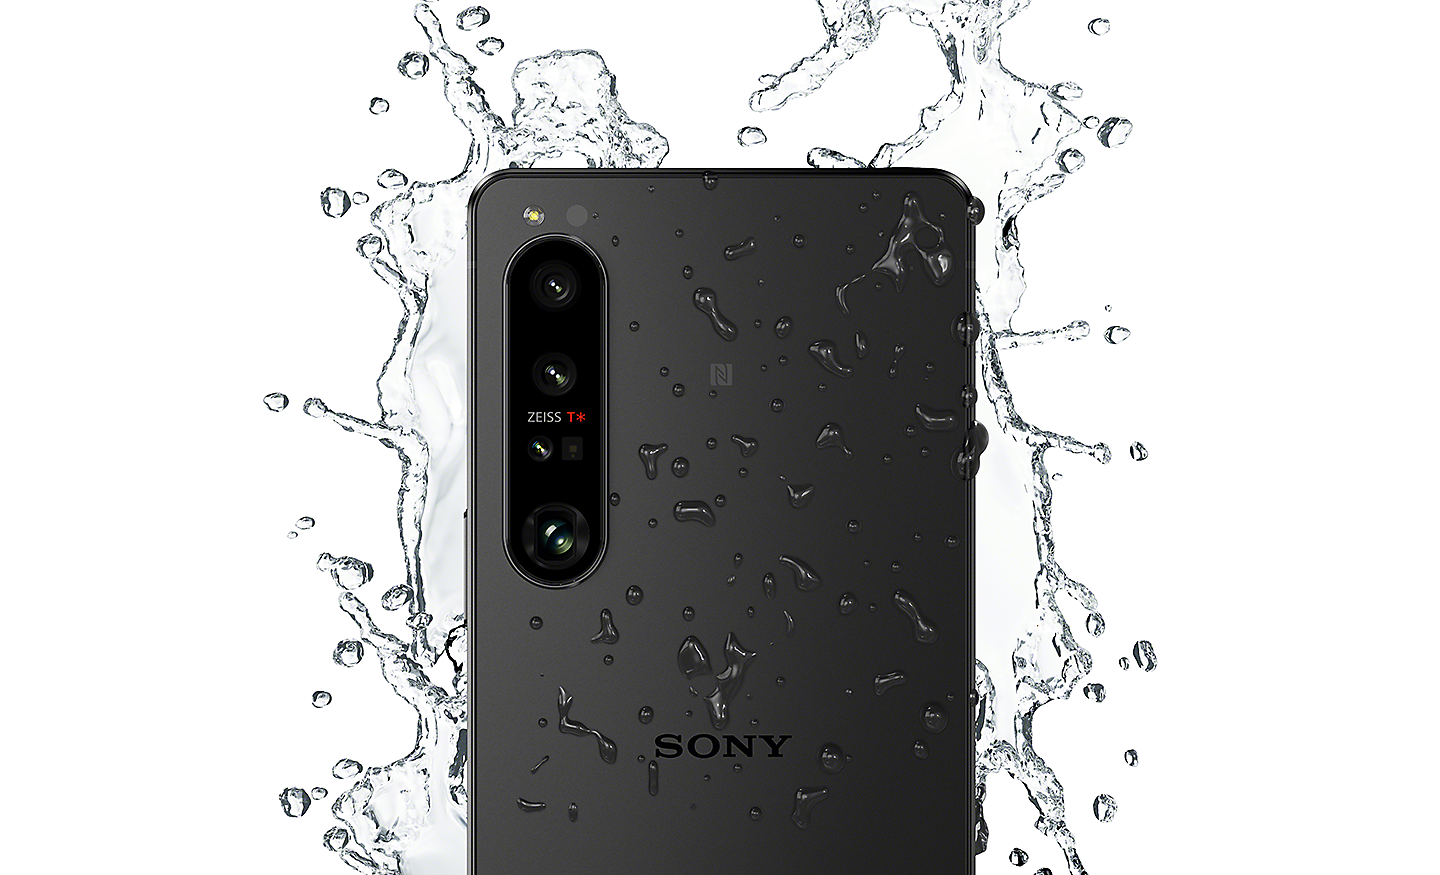 Xperia 1 IV being splashed with water